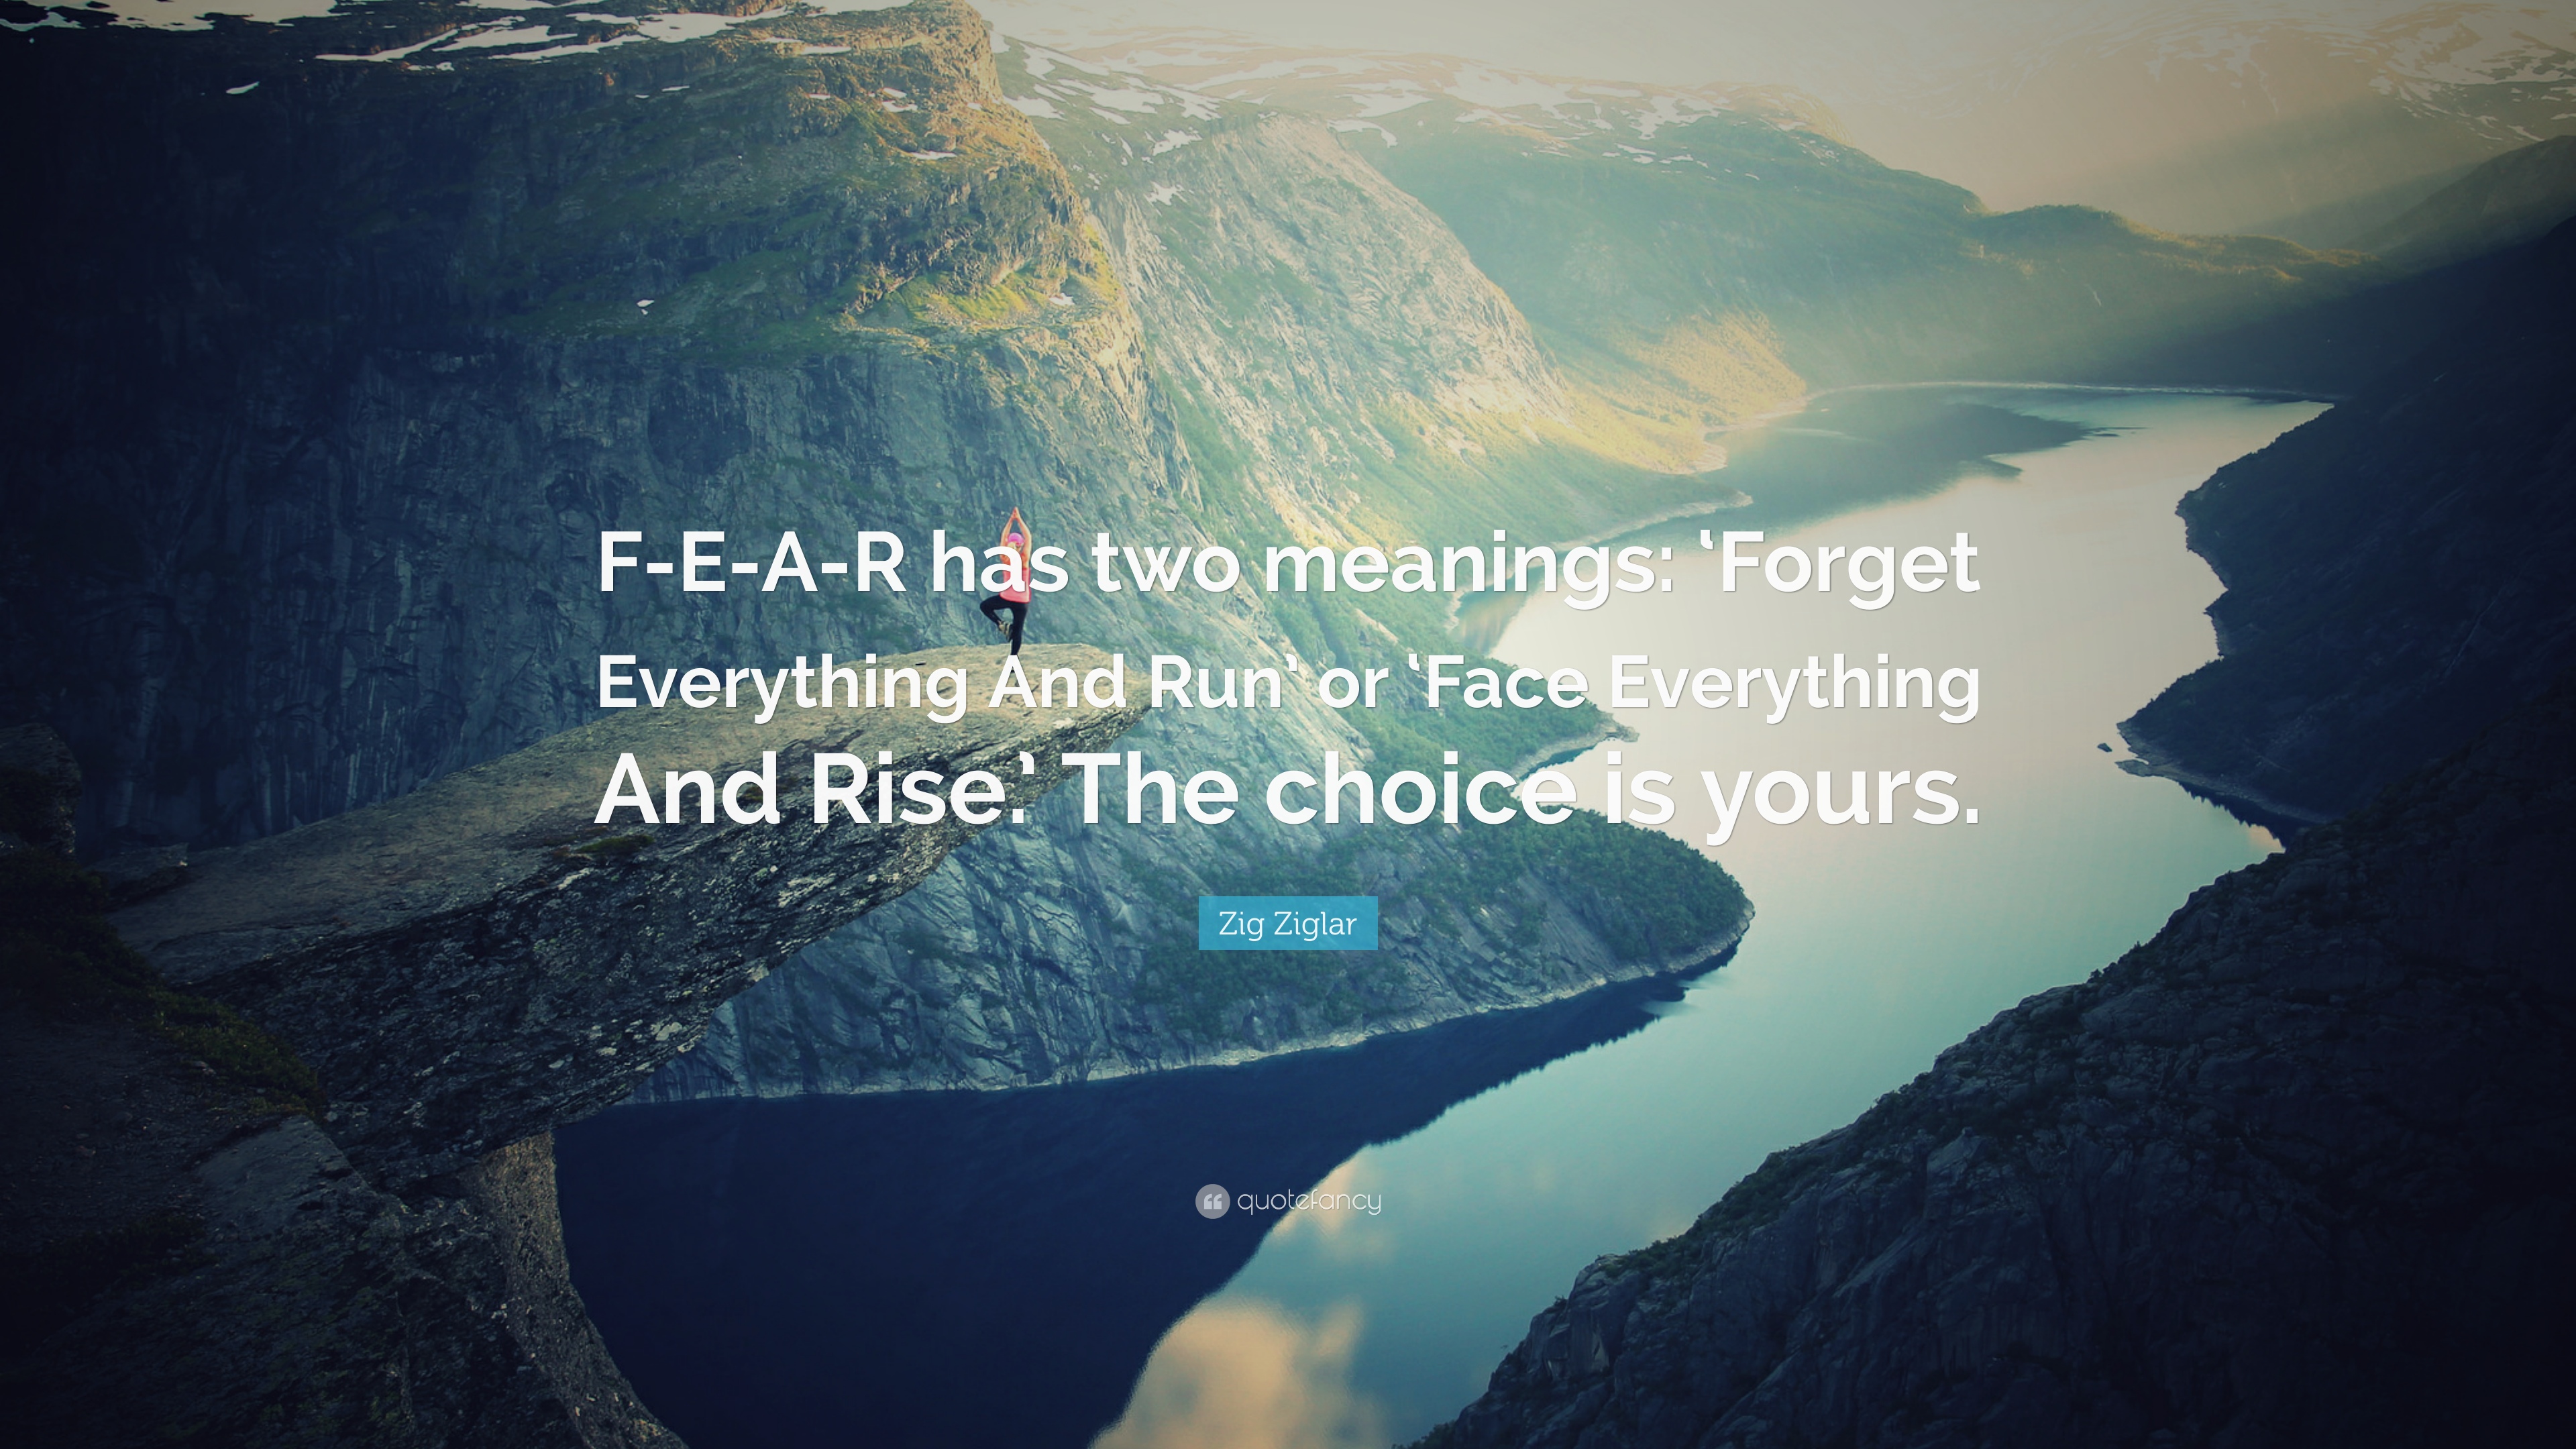 Zig Ziglar Quote: “F E A R Has Two Meanings: 'Forget Everything And Run' Or 'Face Everything And Rise.'